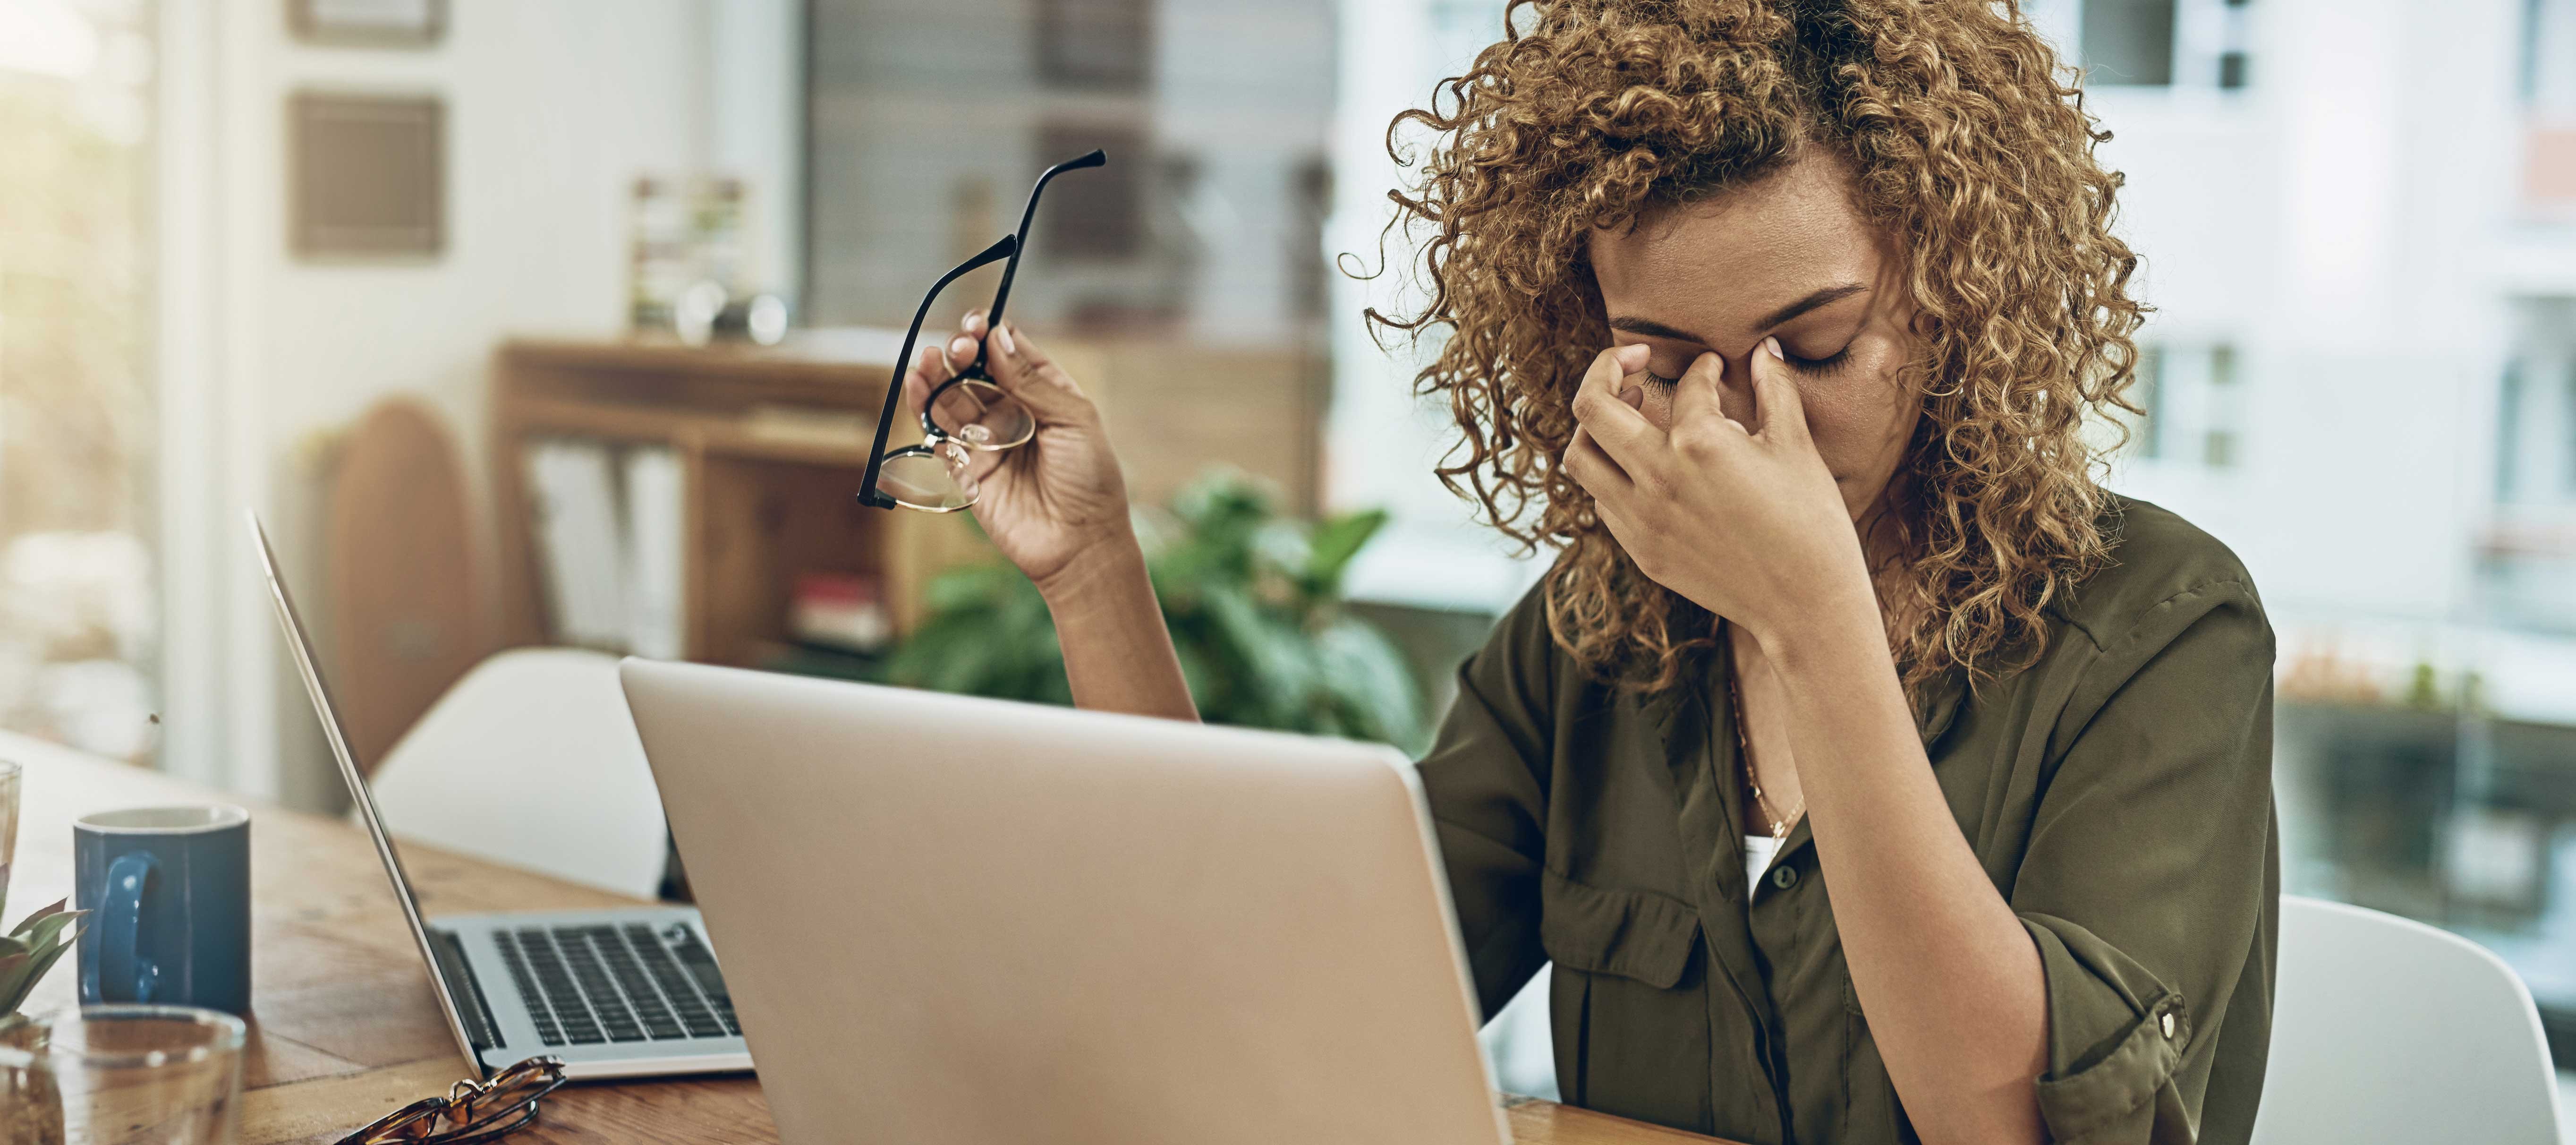 Heroic-Fundraising-Featured-Image-Stressed-Woman